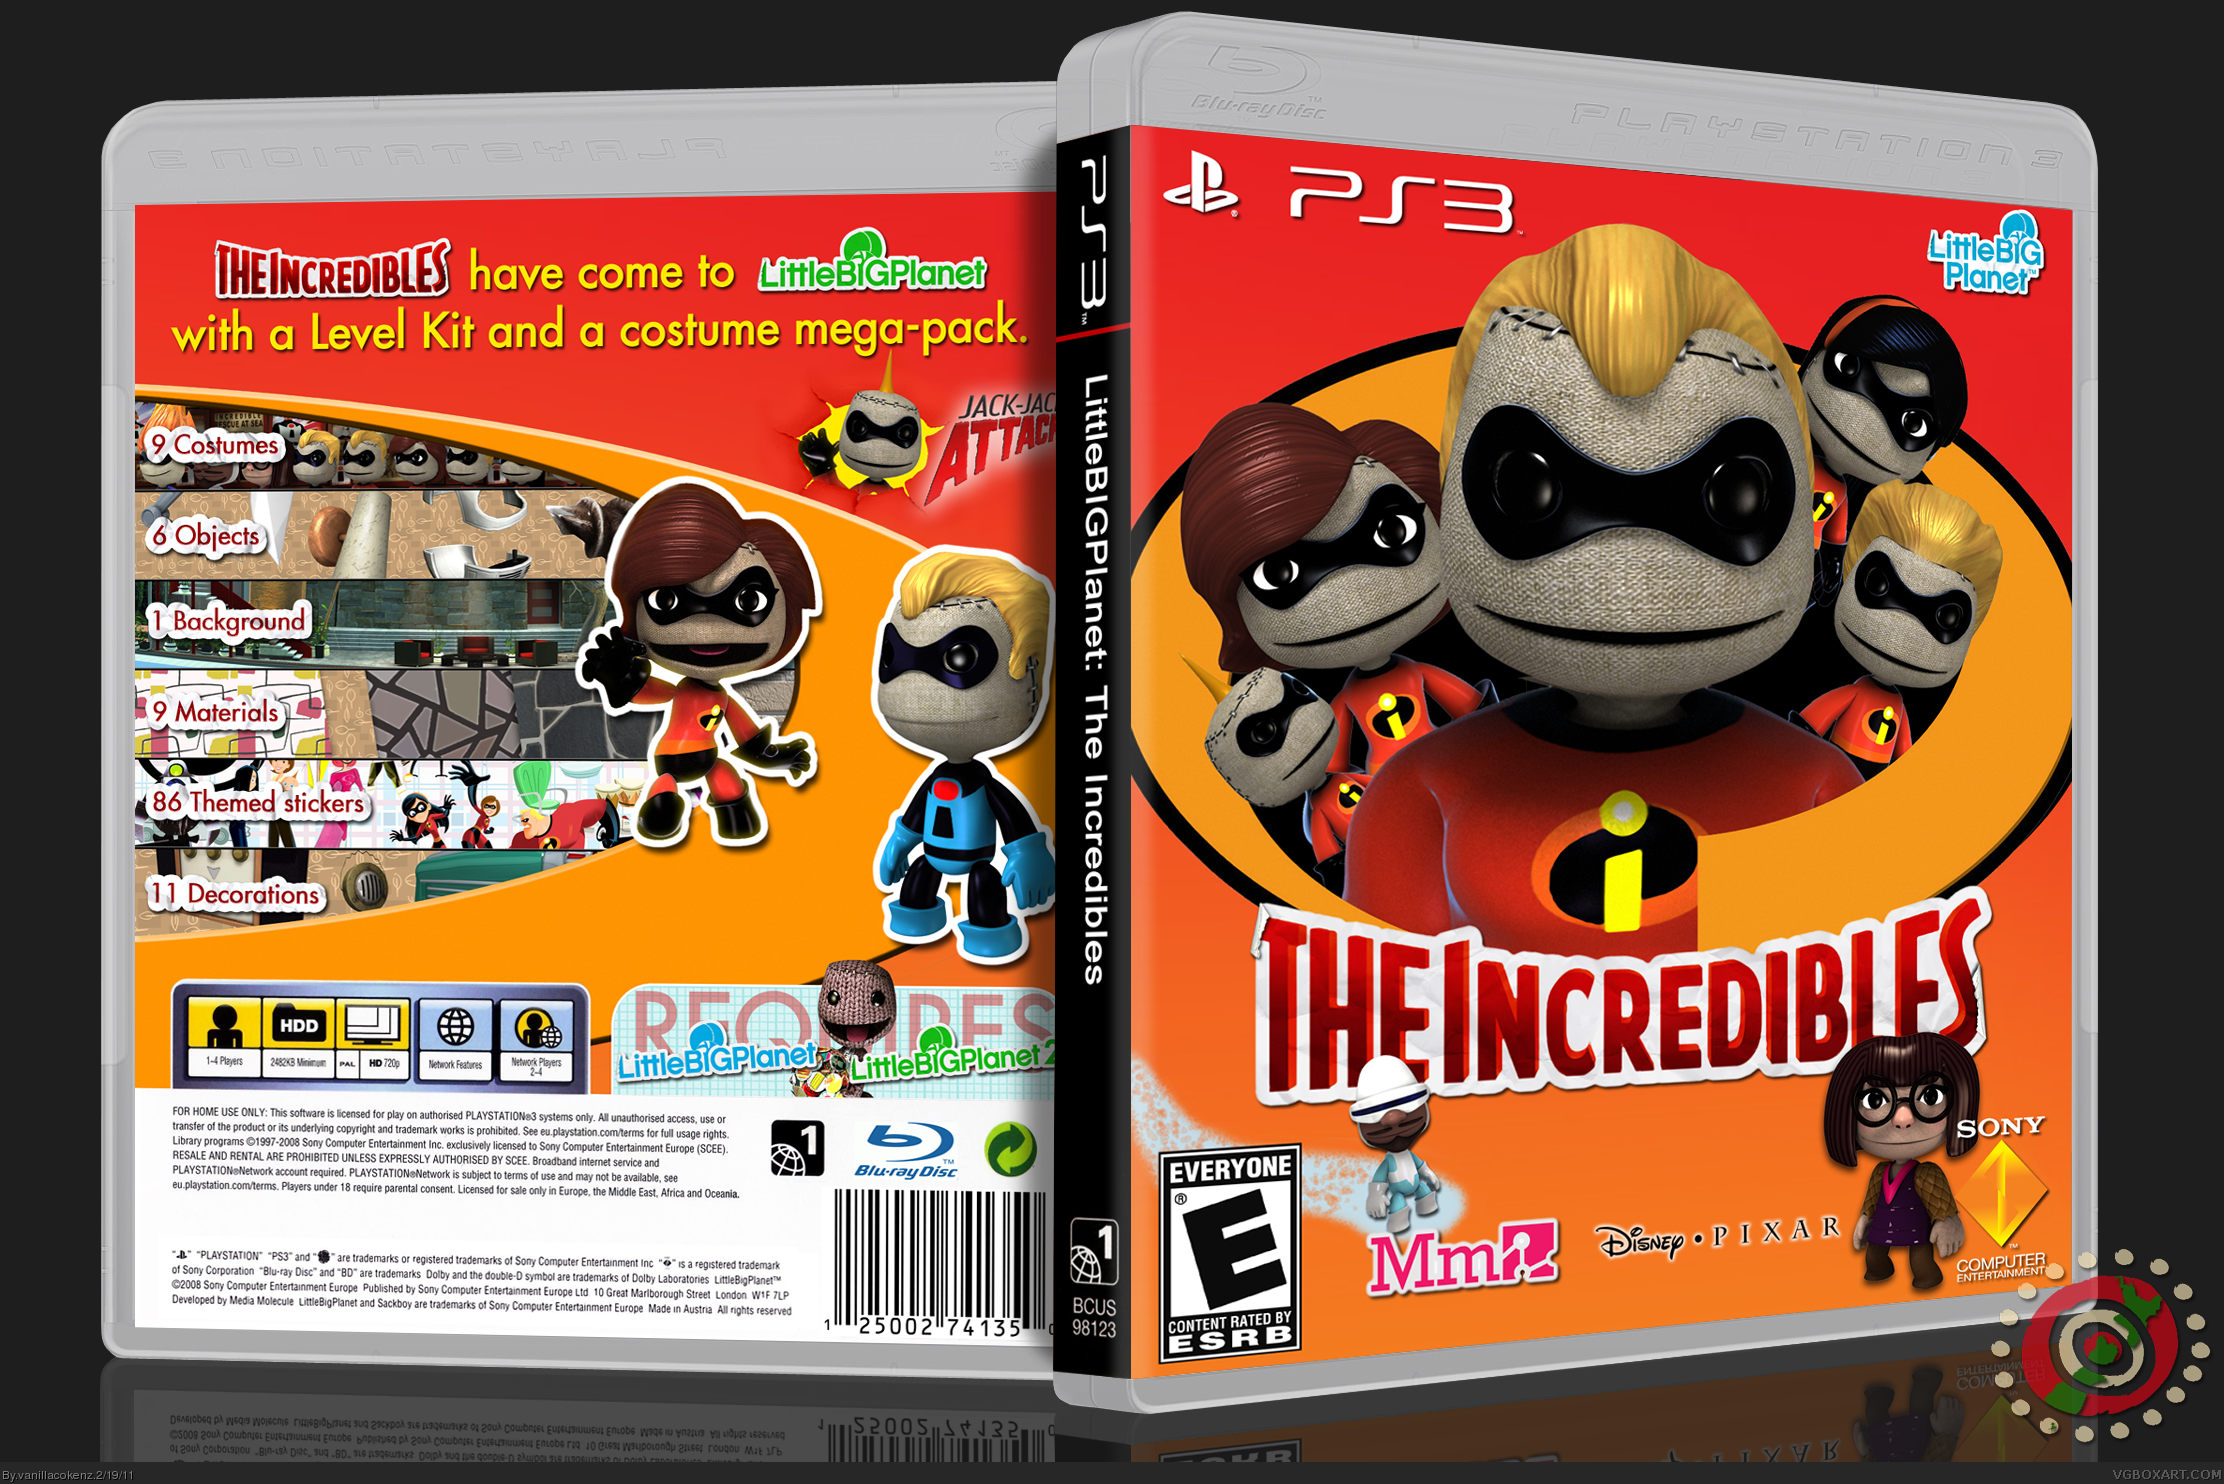 LittleBIGPlanet: The Incredibles box cover